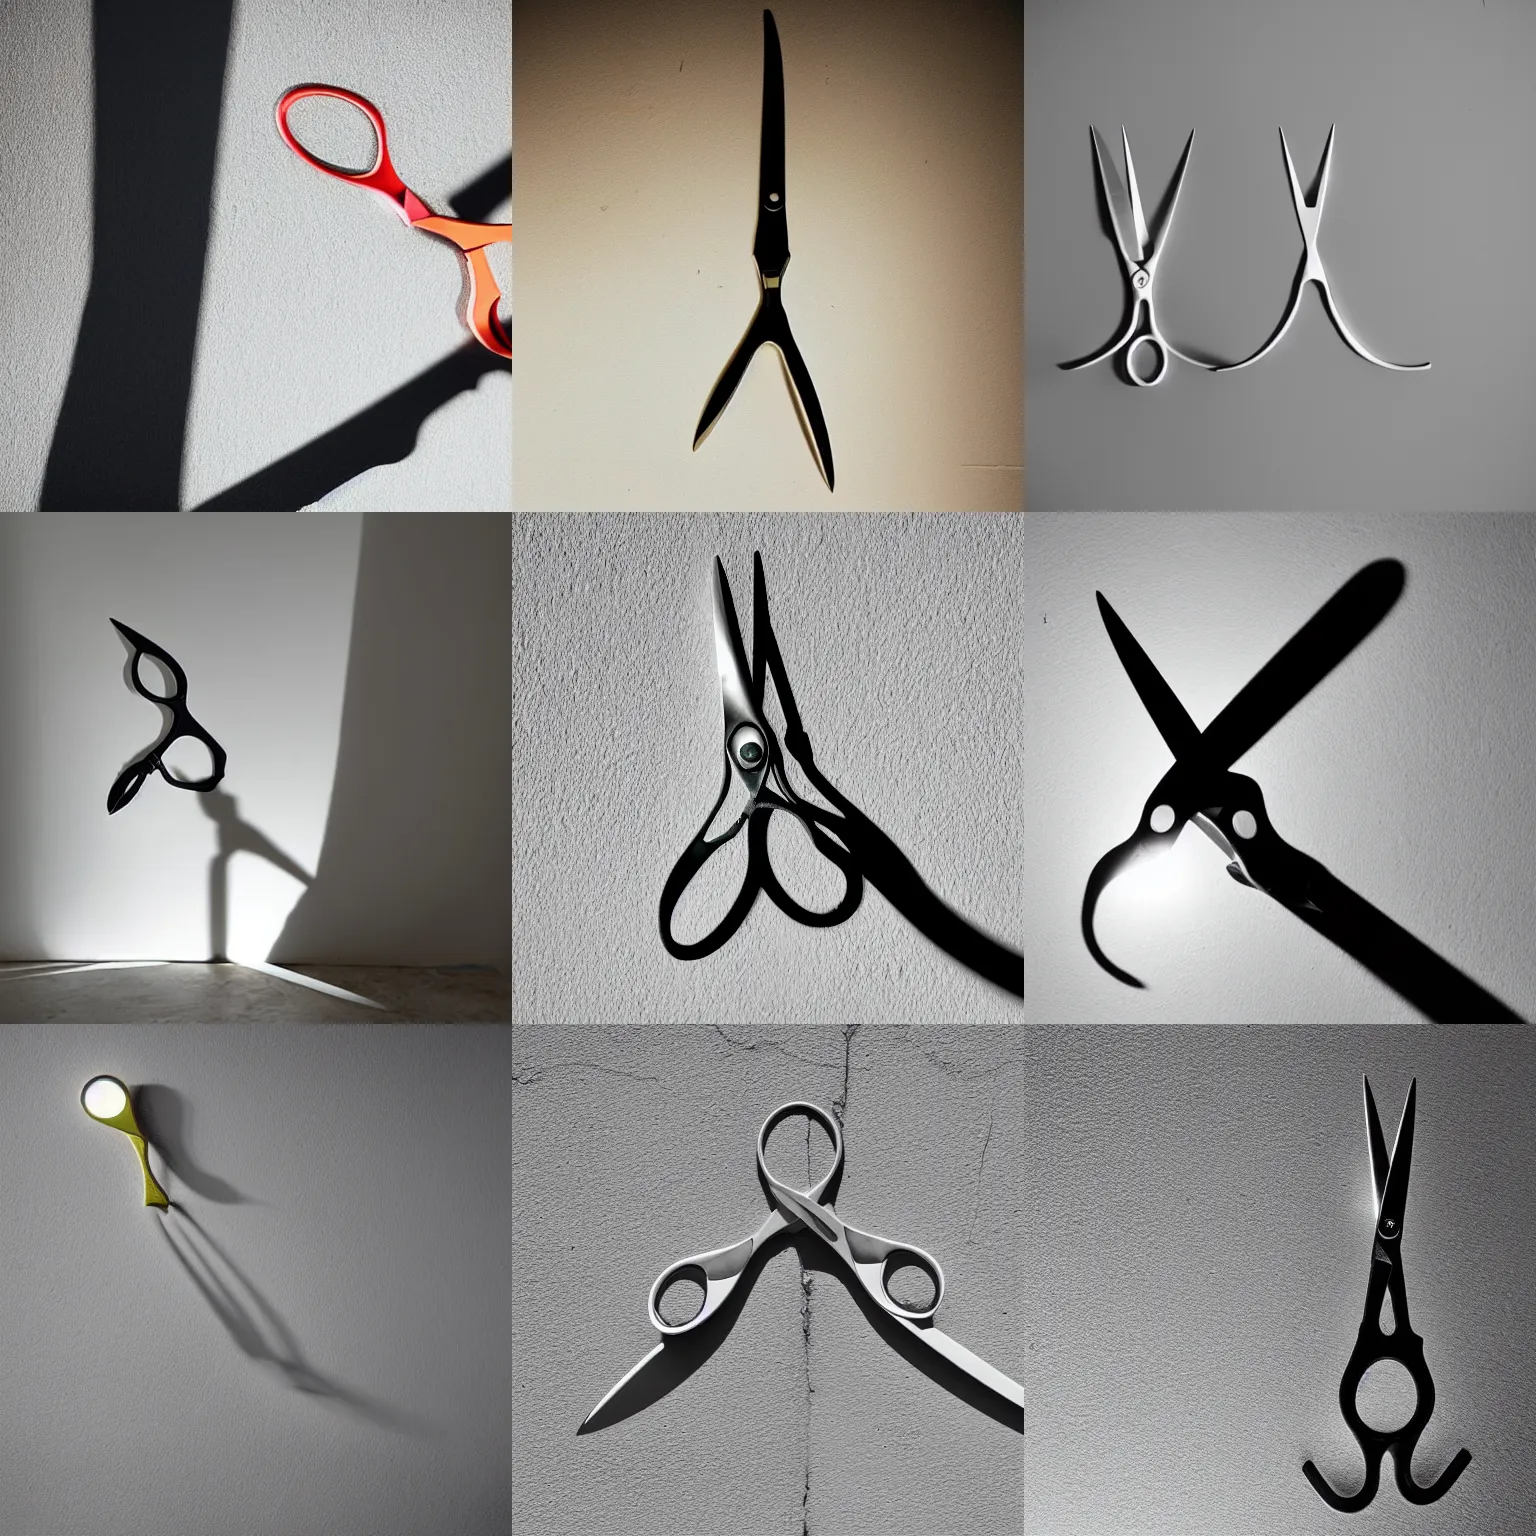 Prompt: a pair of scissors is floating in mid - air, illuminated by a bright light, casting a stark shadow on the wall behind it